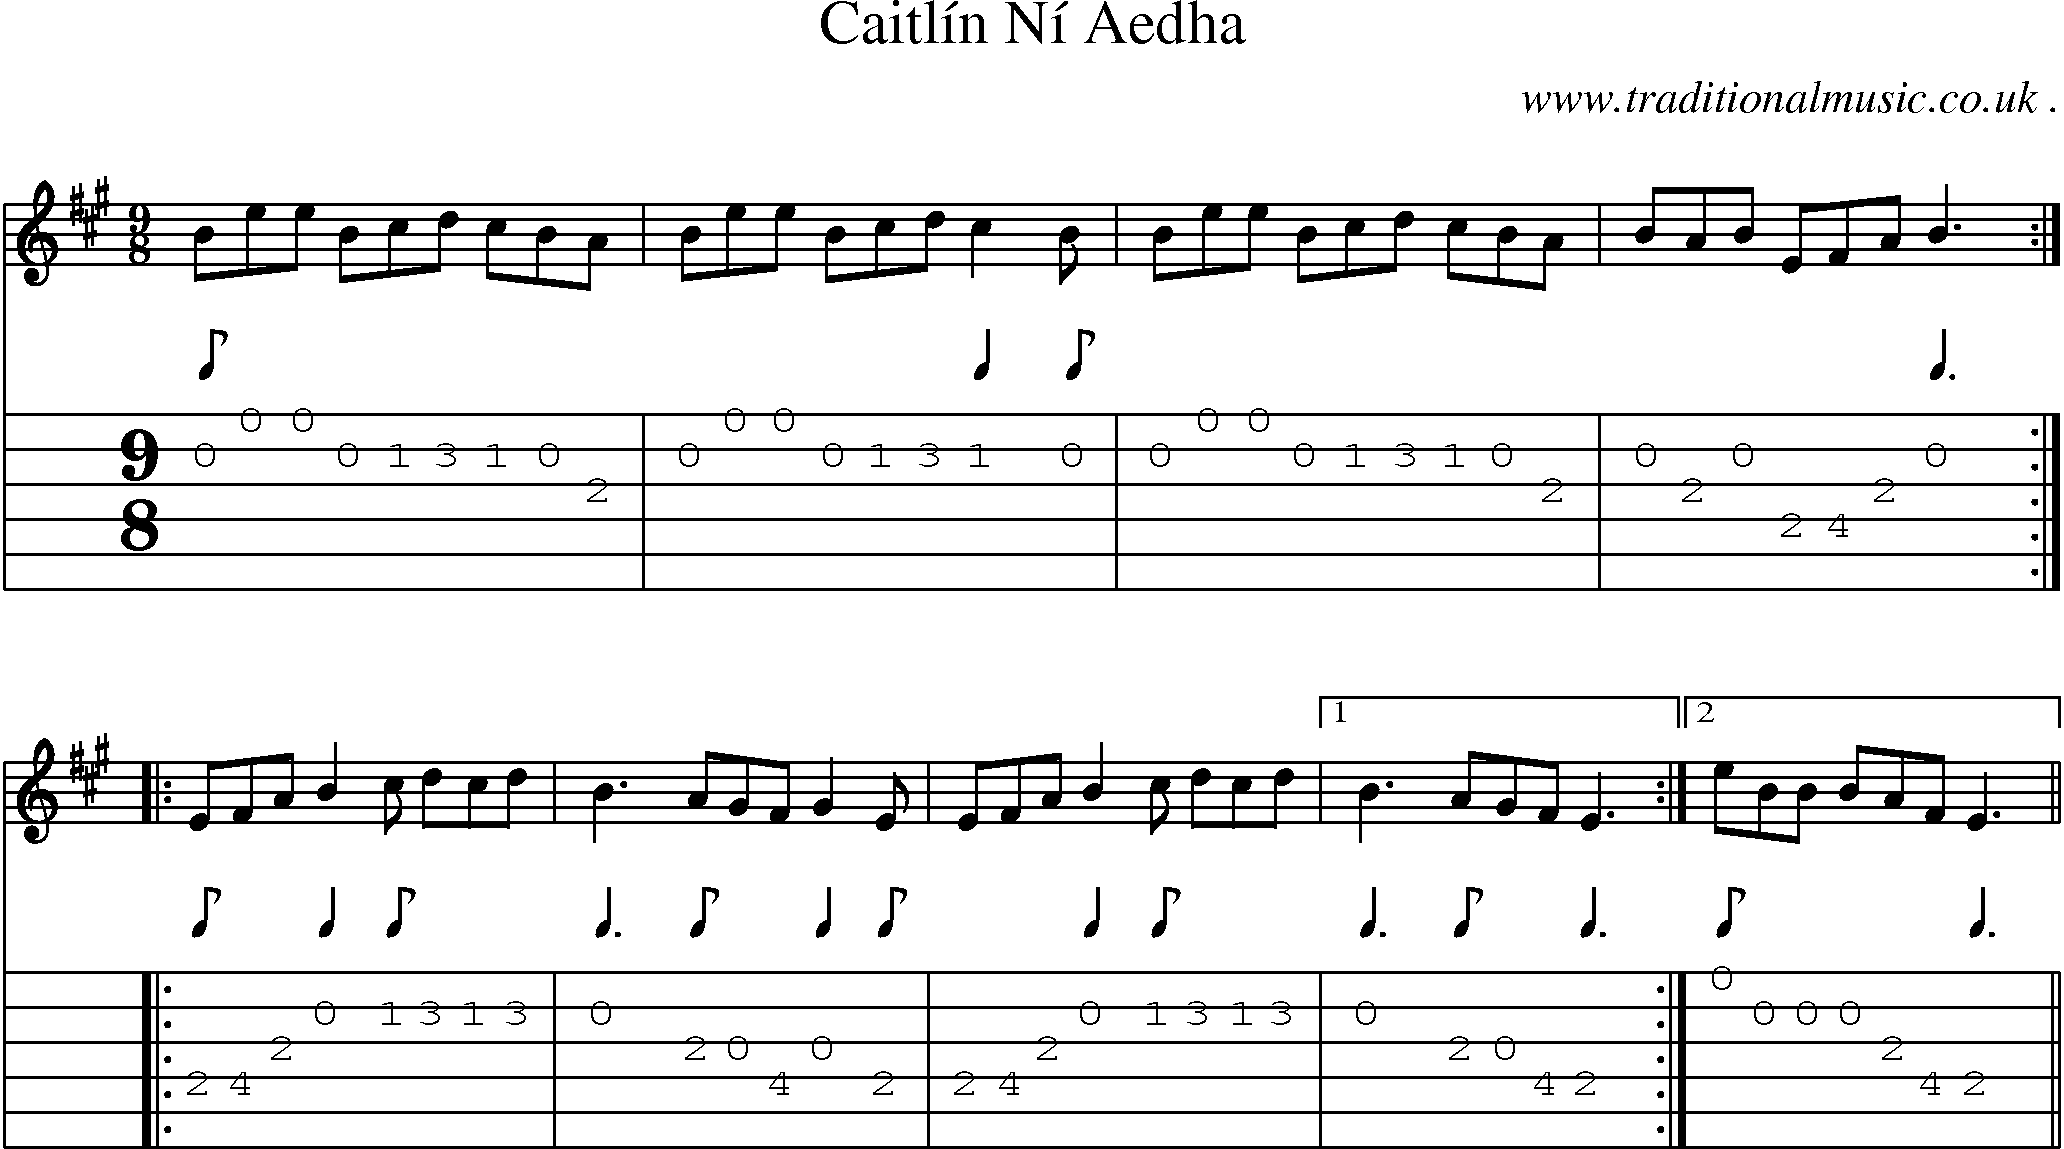 Sheet-Music and Guitar Tabs for Caitlin Ni Aedha